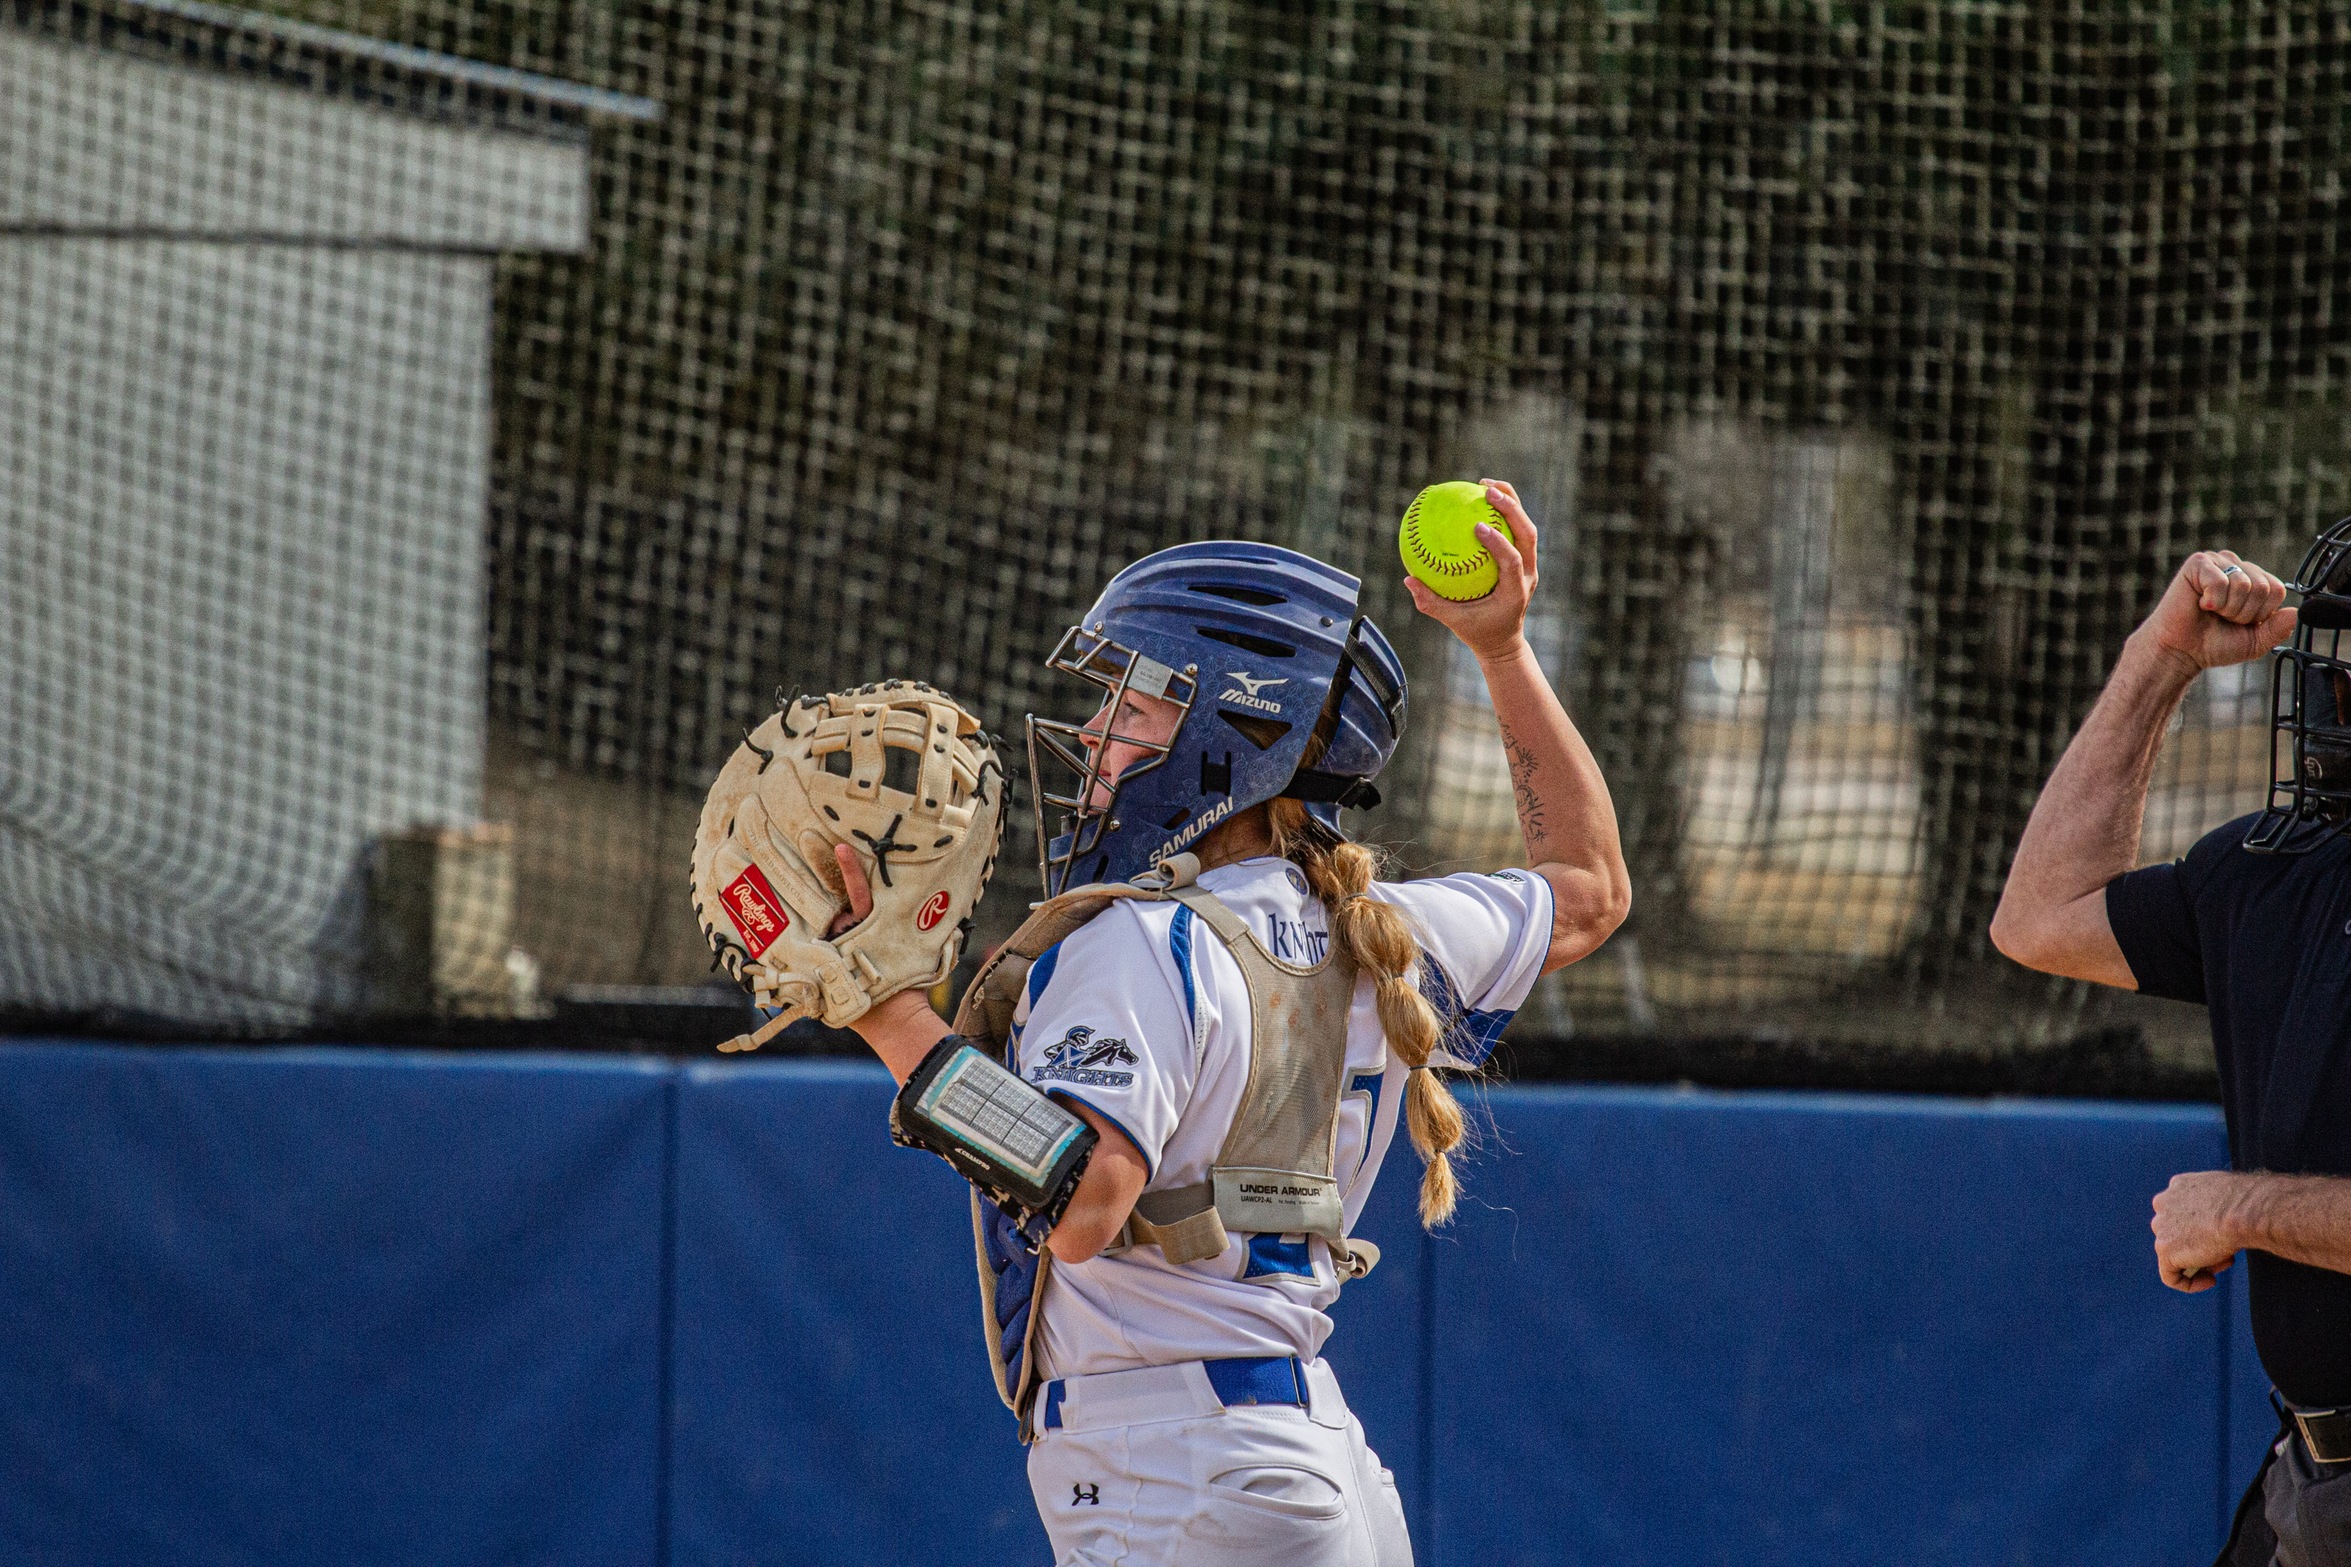 Knights softball wins second game of doubleheader in exciting fashion